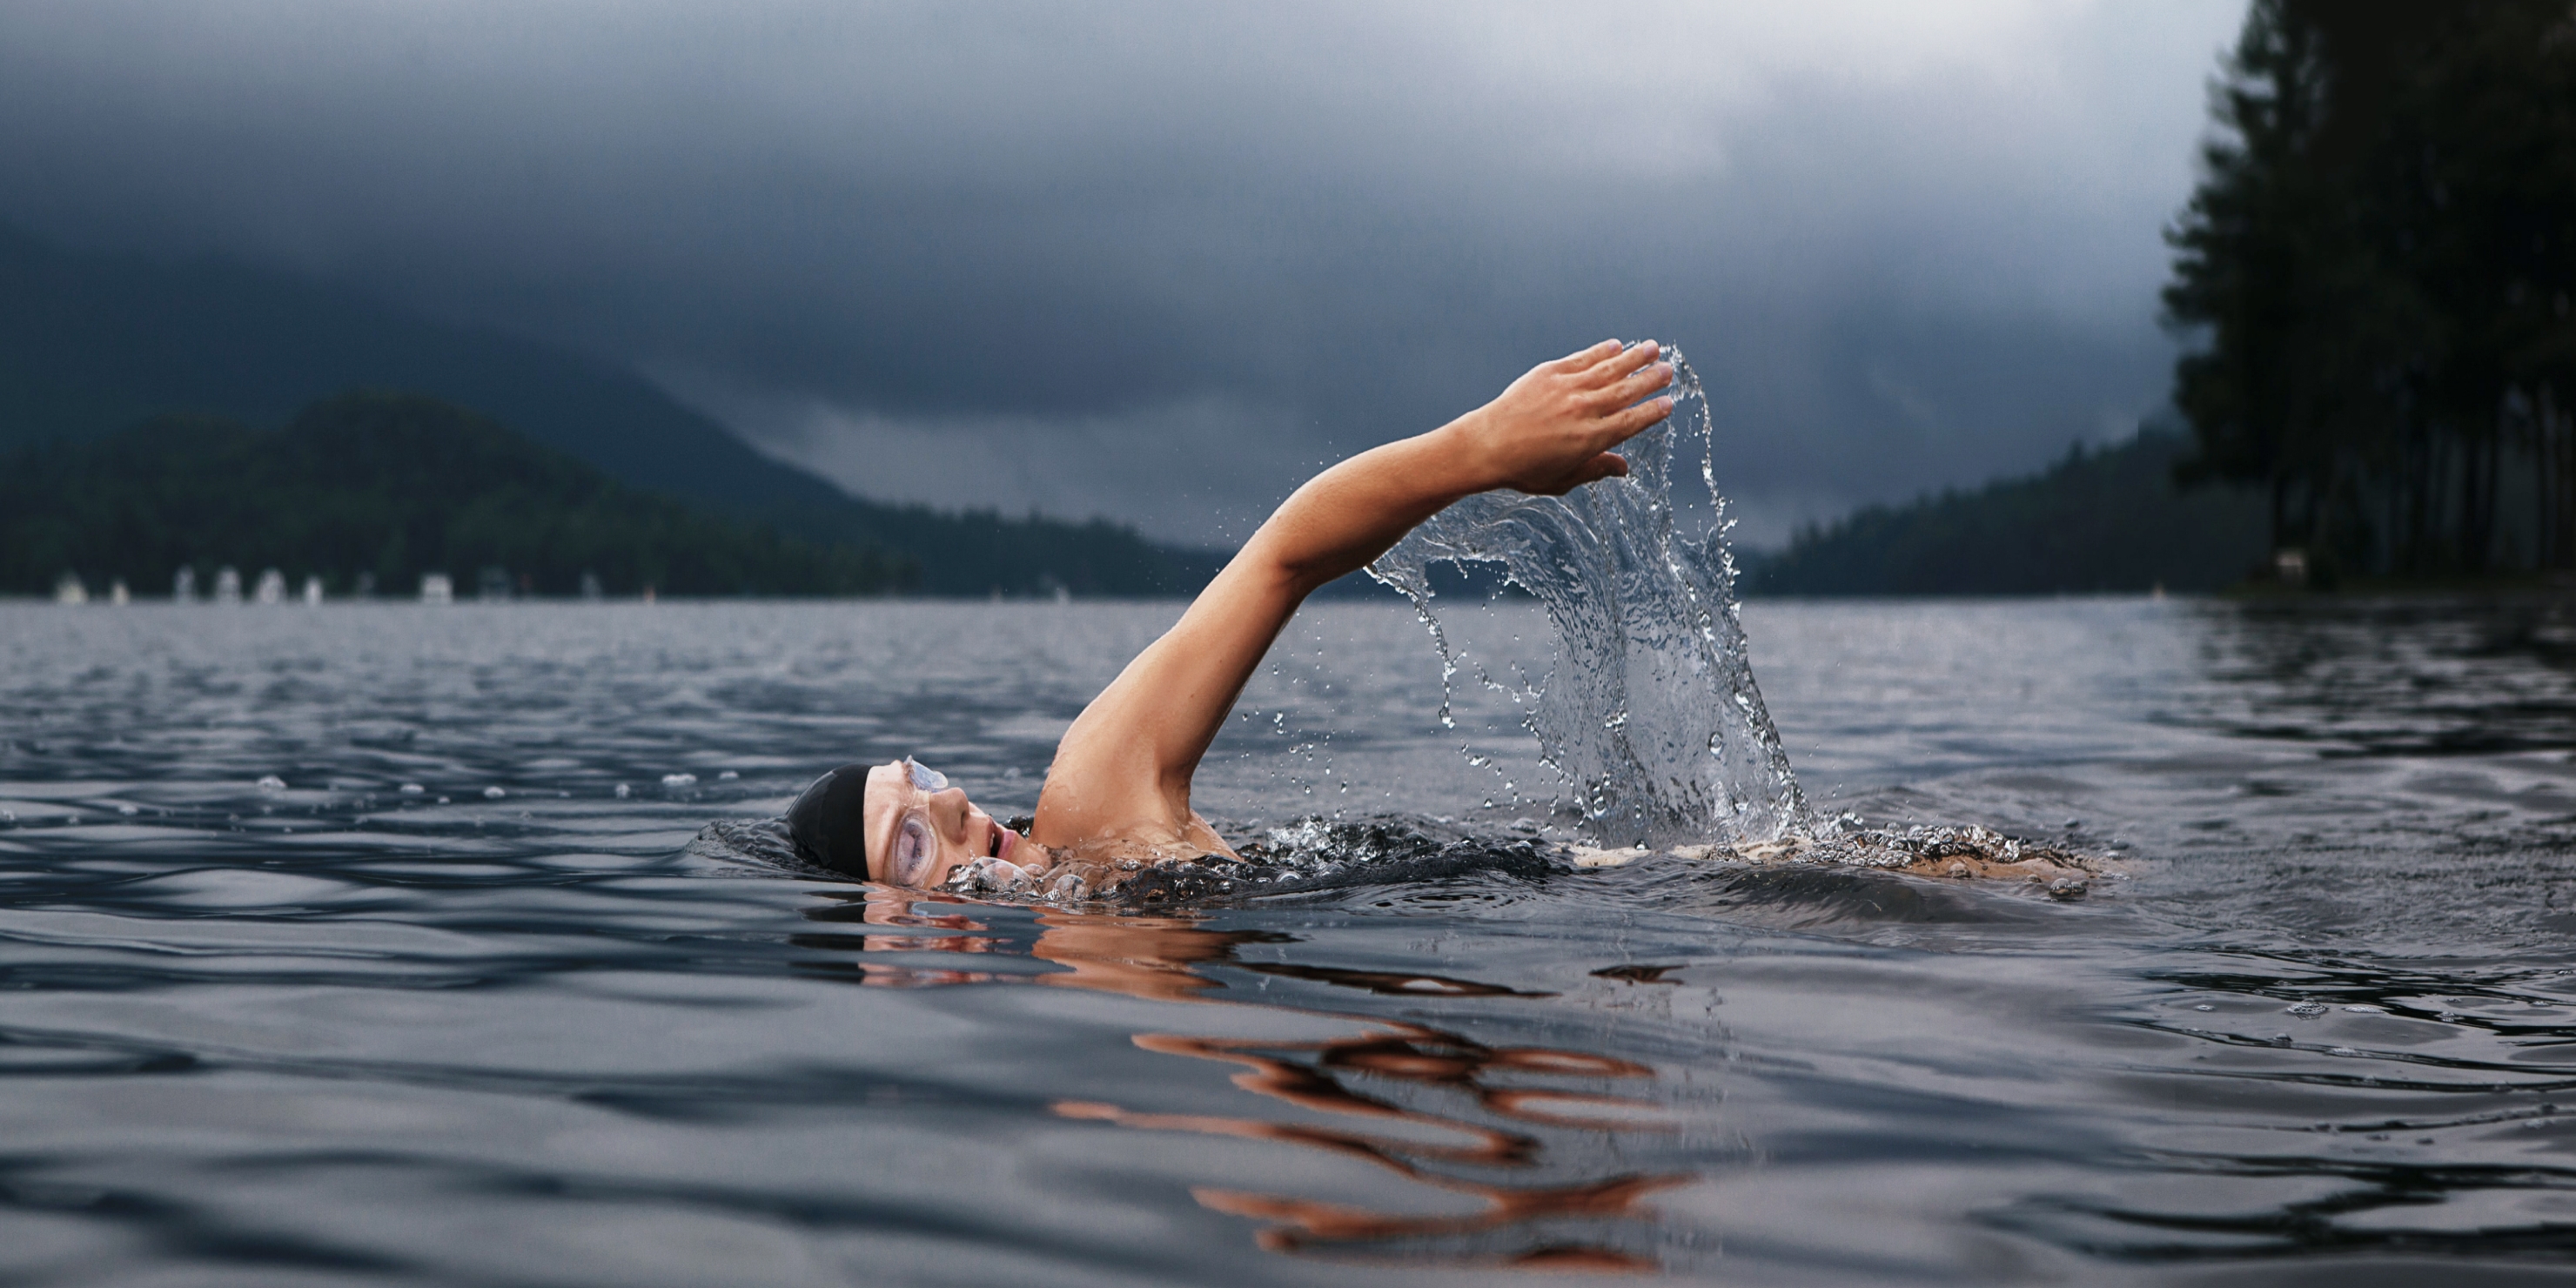 <p>Image of a person front crawling in dark water. Mountains and dark clouds are seen in the background.</p>
